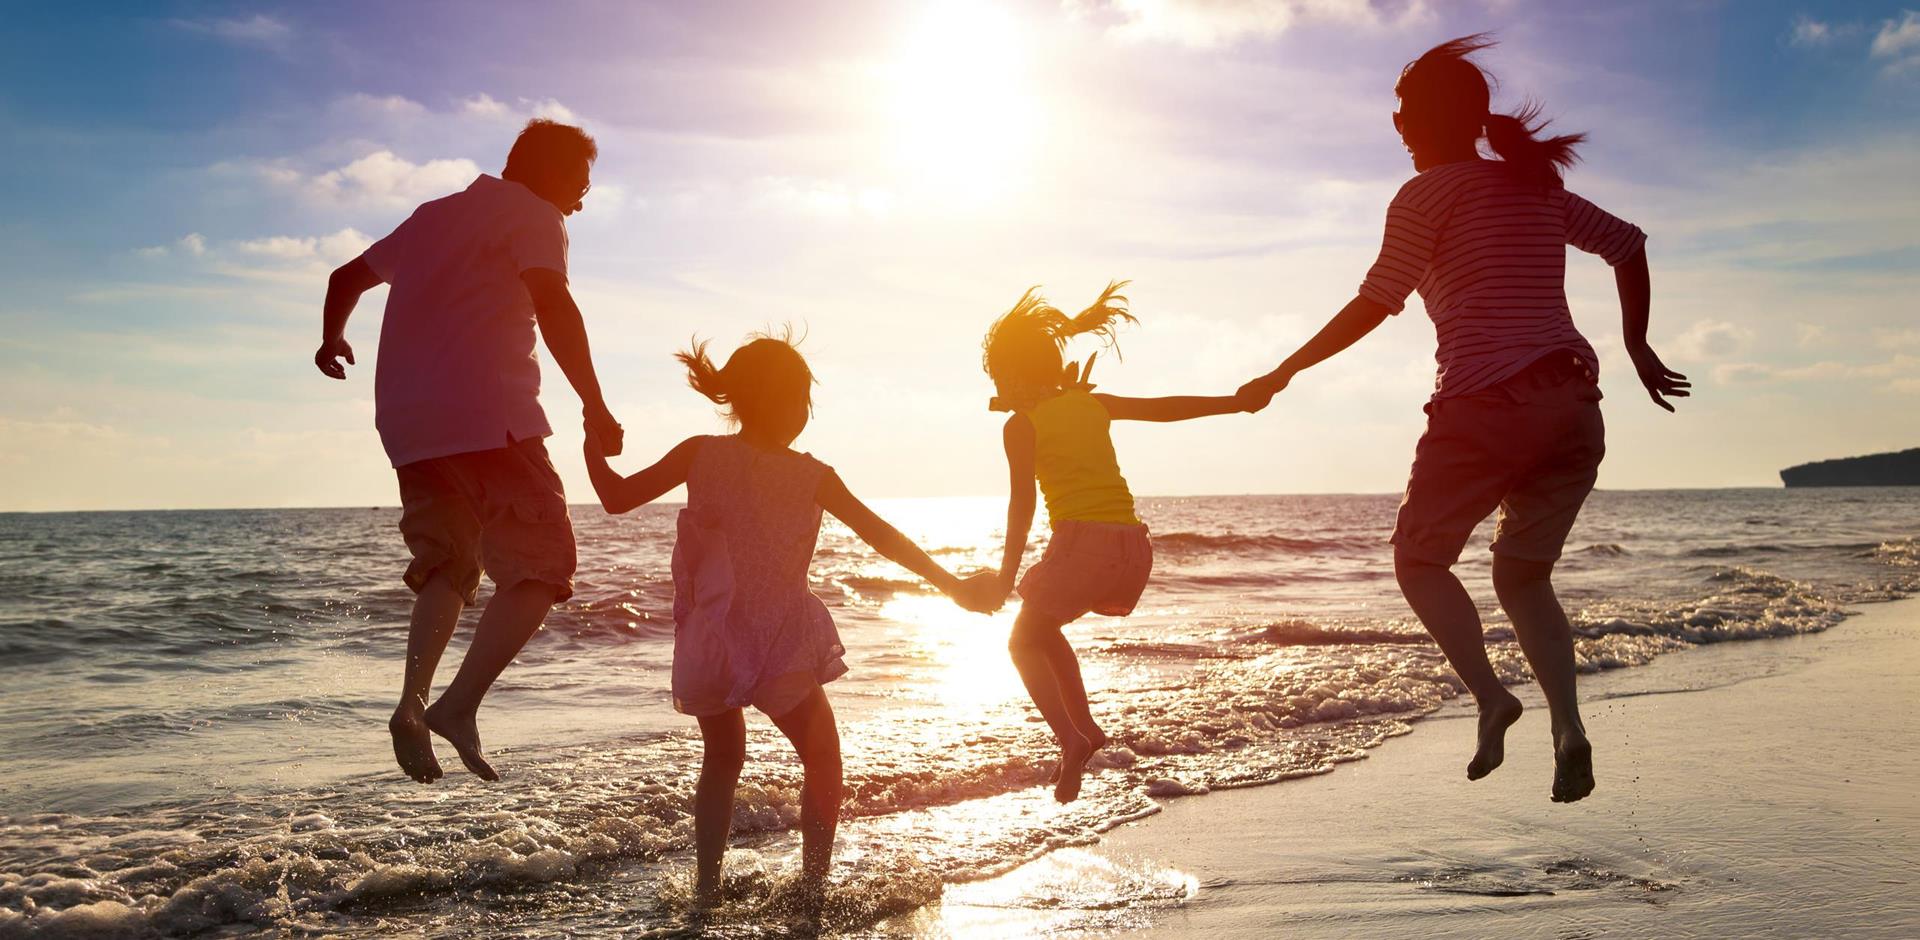 Luxury family holiday ideas - school holiday travel planner